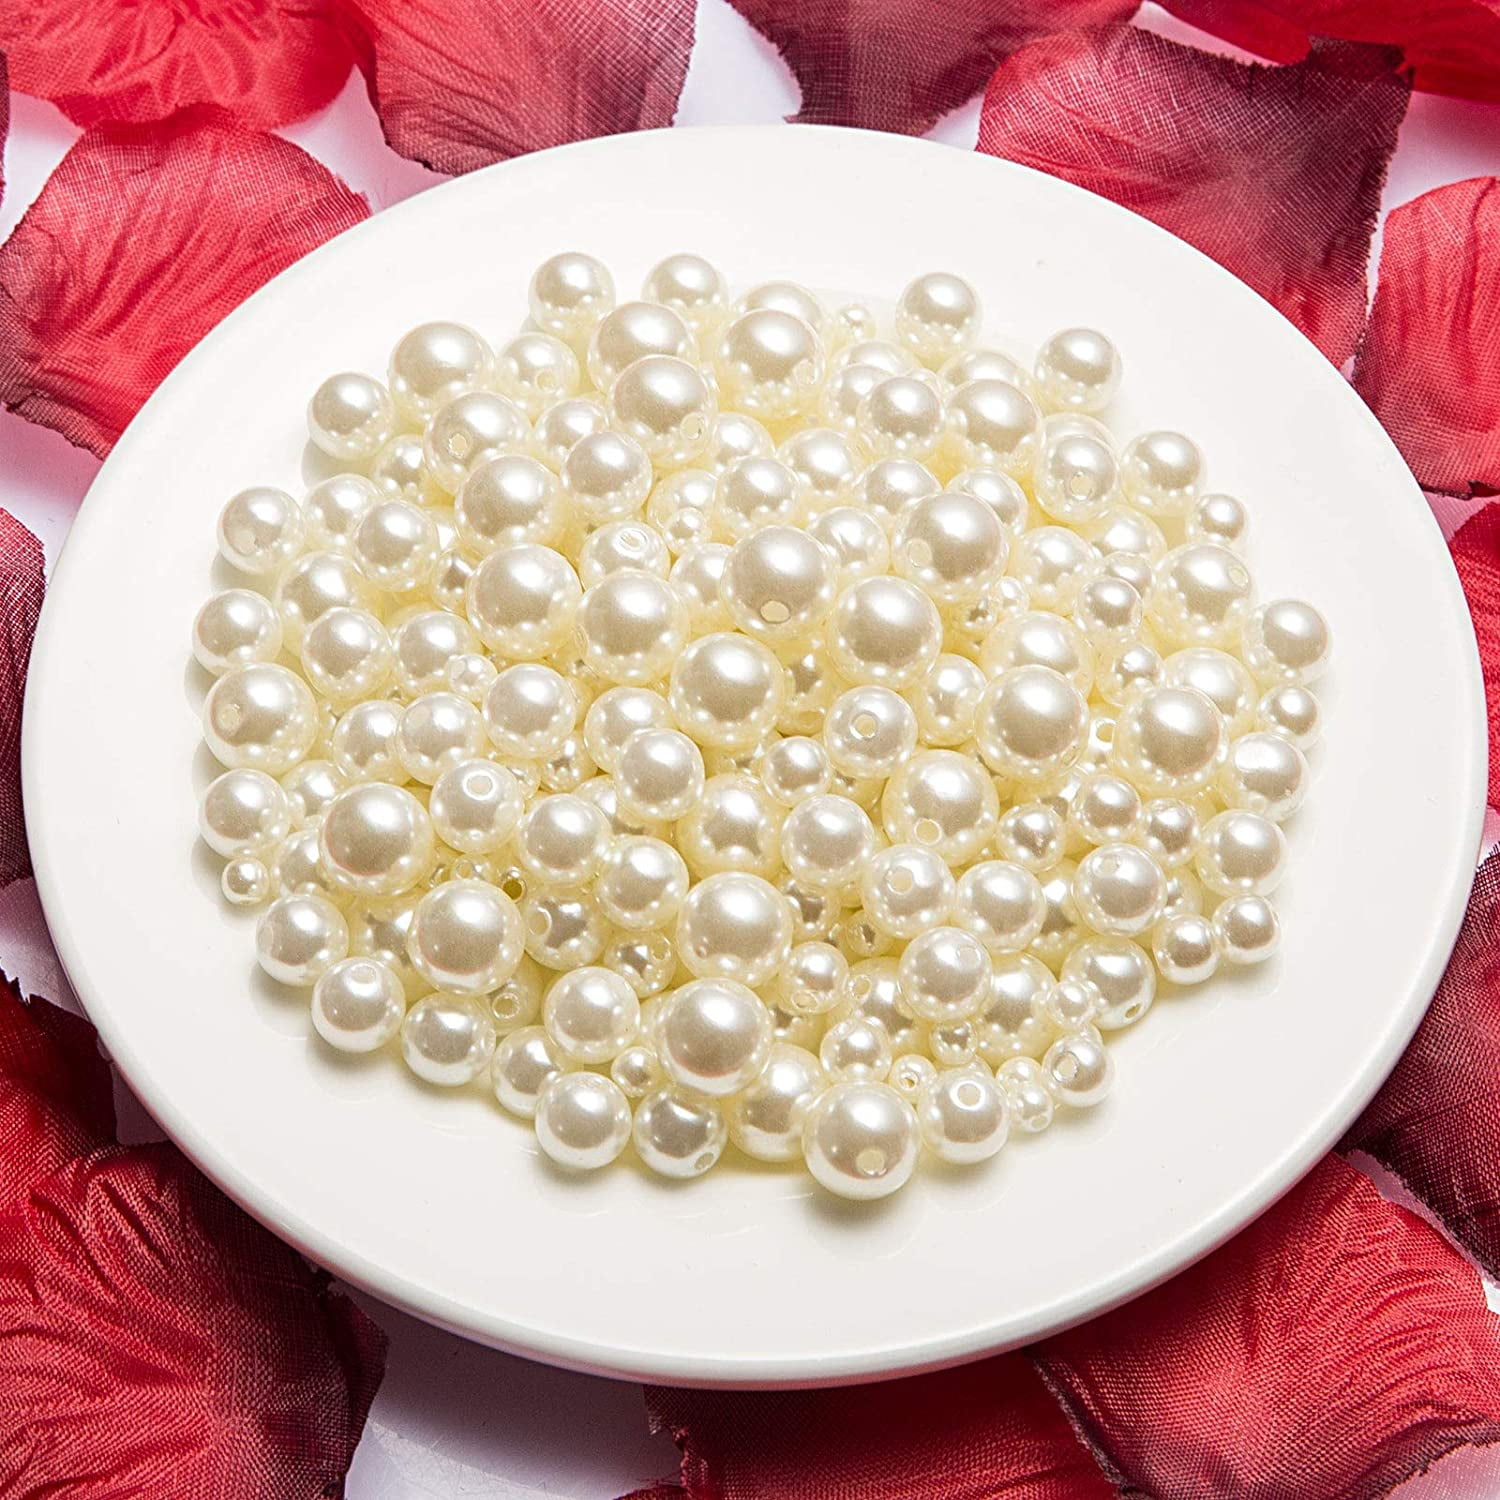 Naler 500pcs Assorted Pearl Beads for DIY Jewelry Making Vase Fillers Table Scatter Wedding Birthday Party Home Decoration, Ivory&White Color, Acrylic